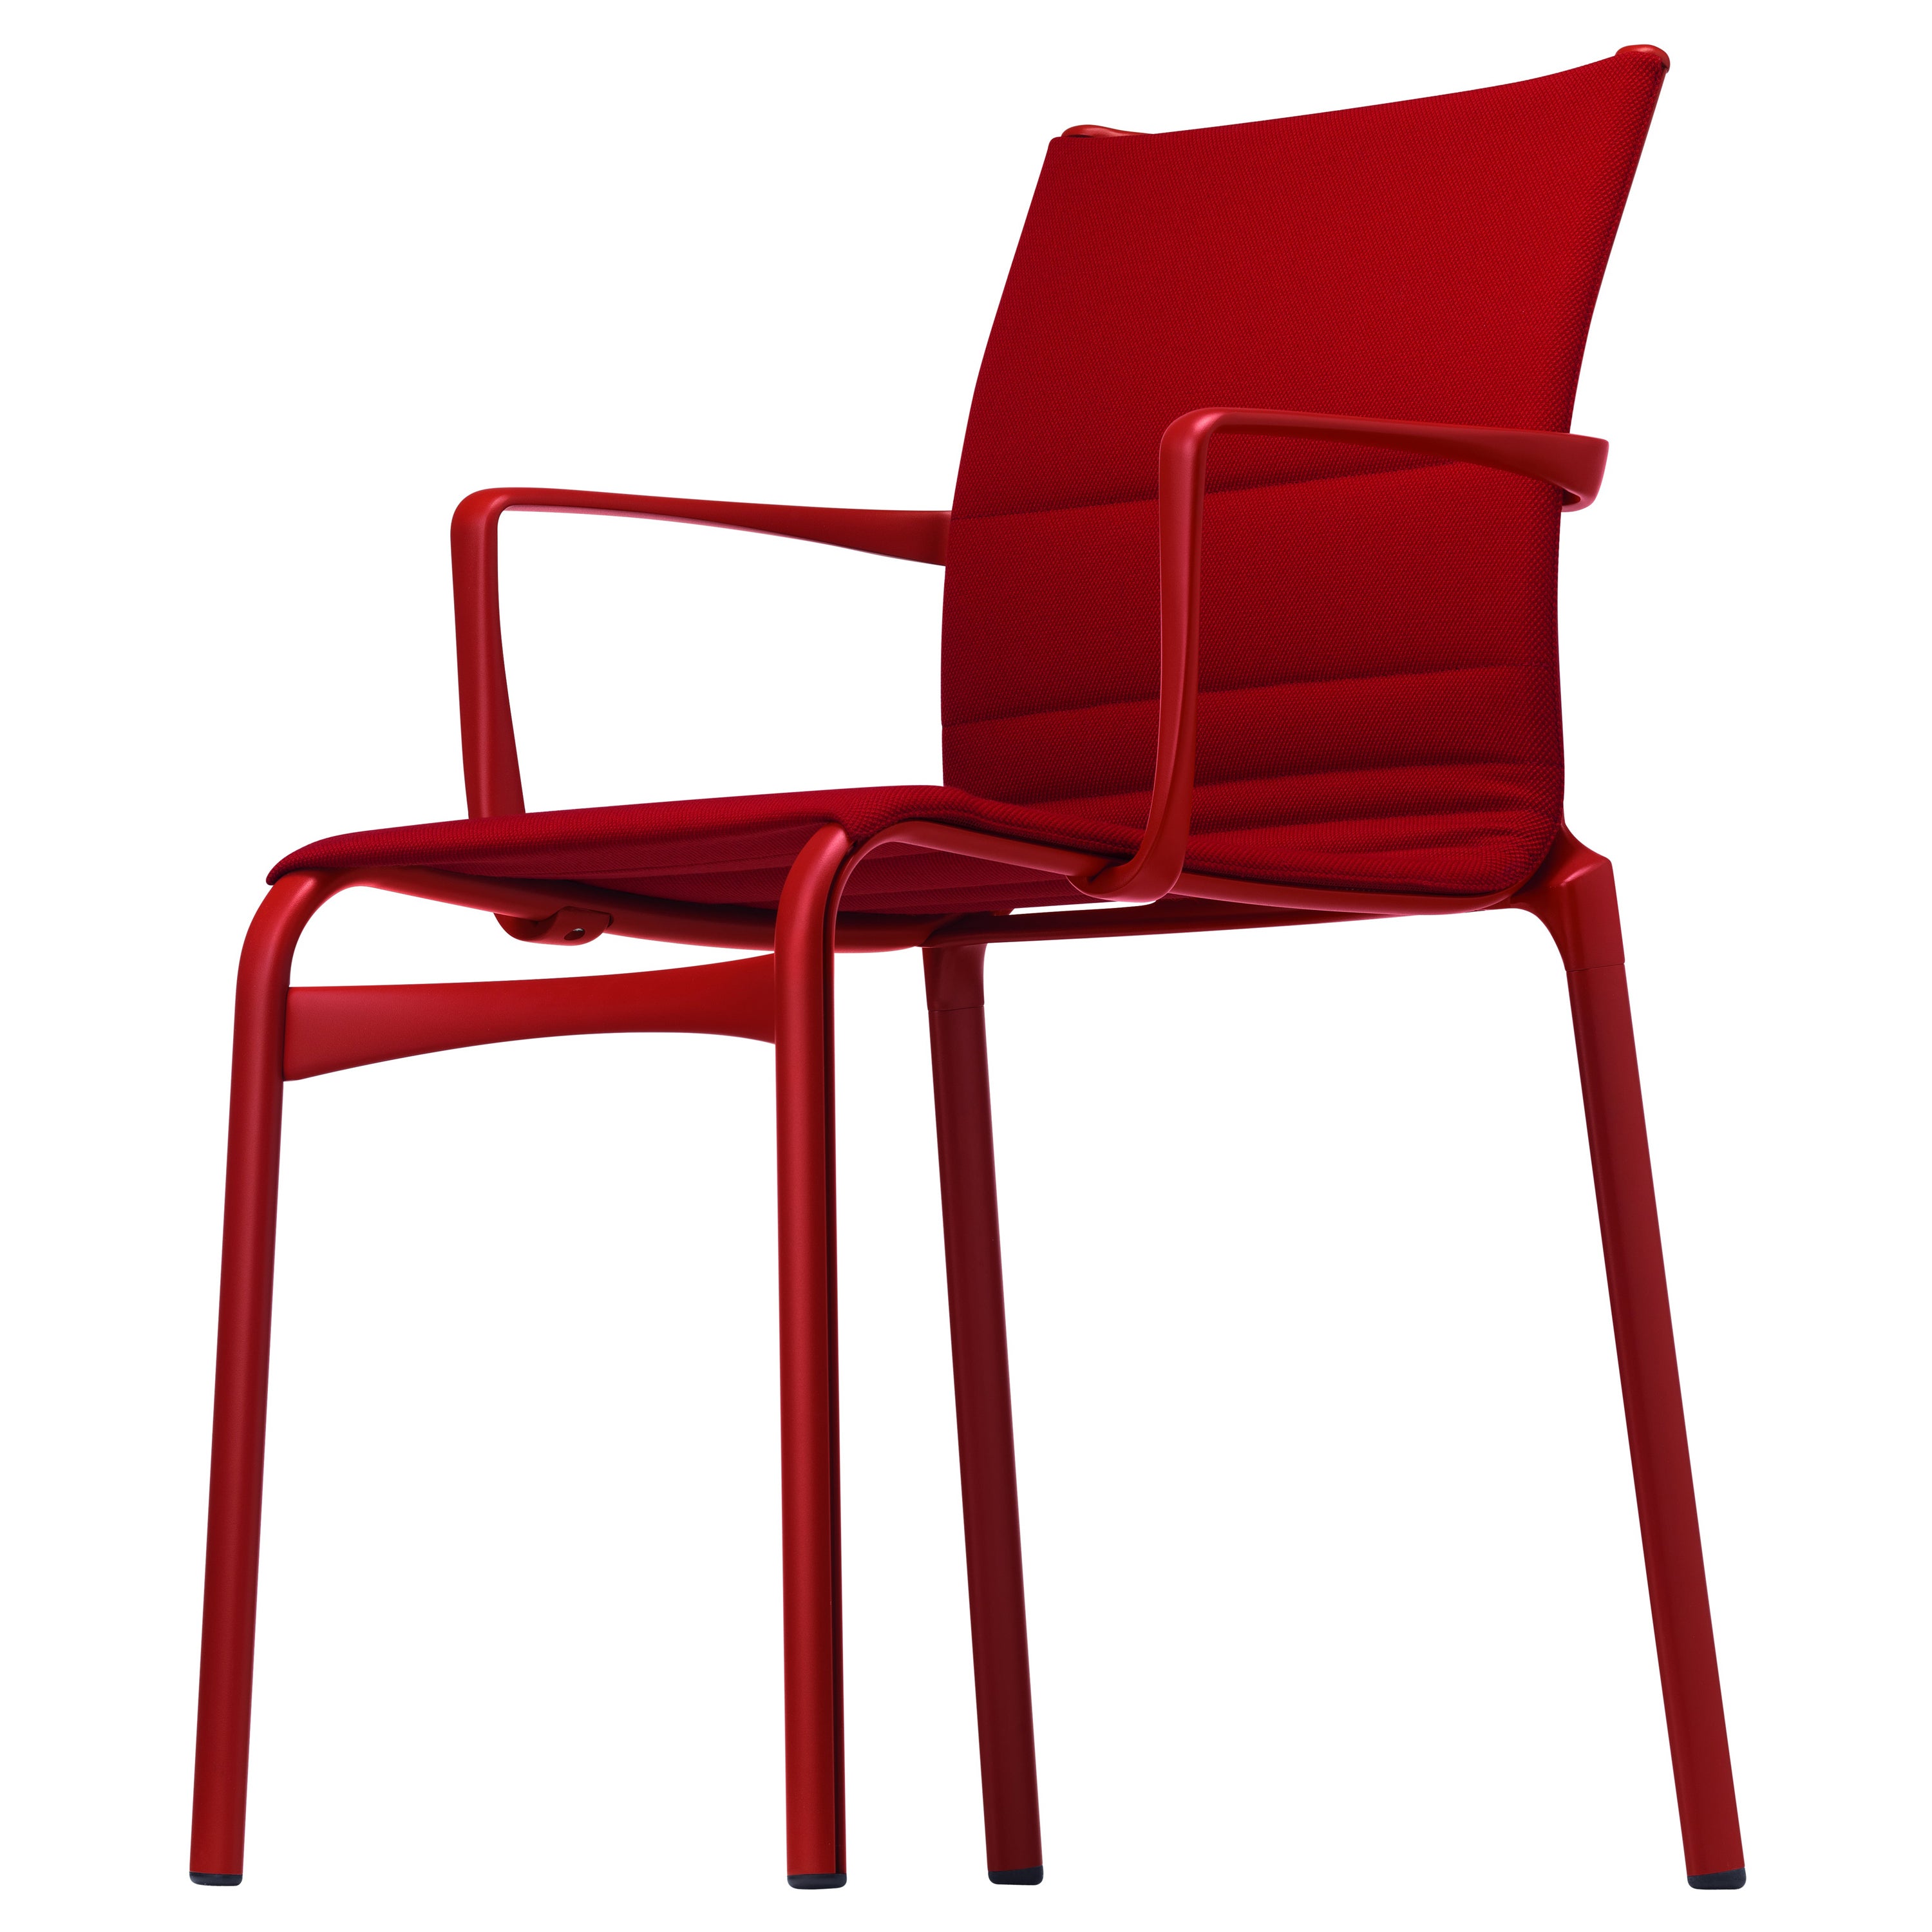 Alias Bigframe 44 Armchair in Red Upholstery with Lacquered Aluminium Frame